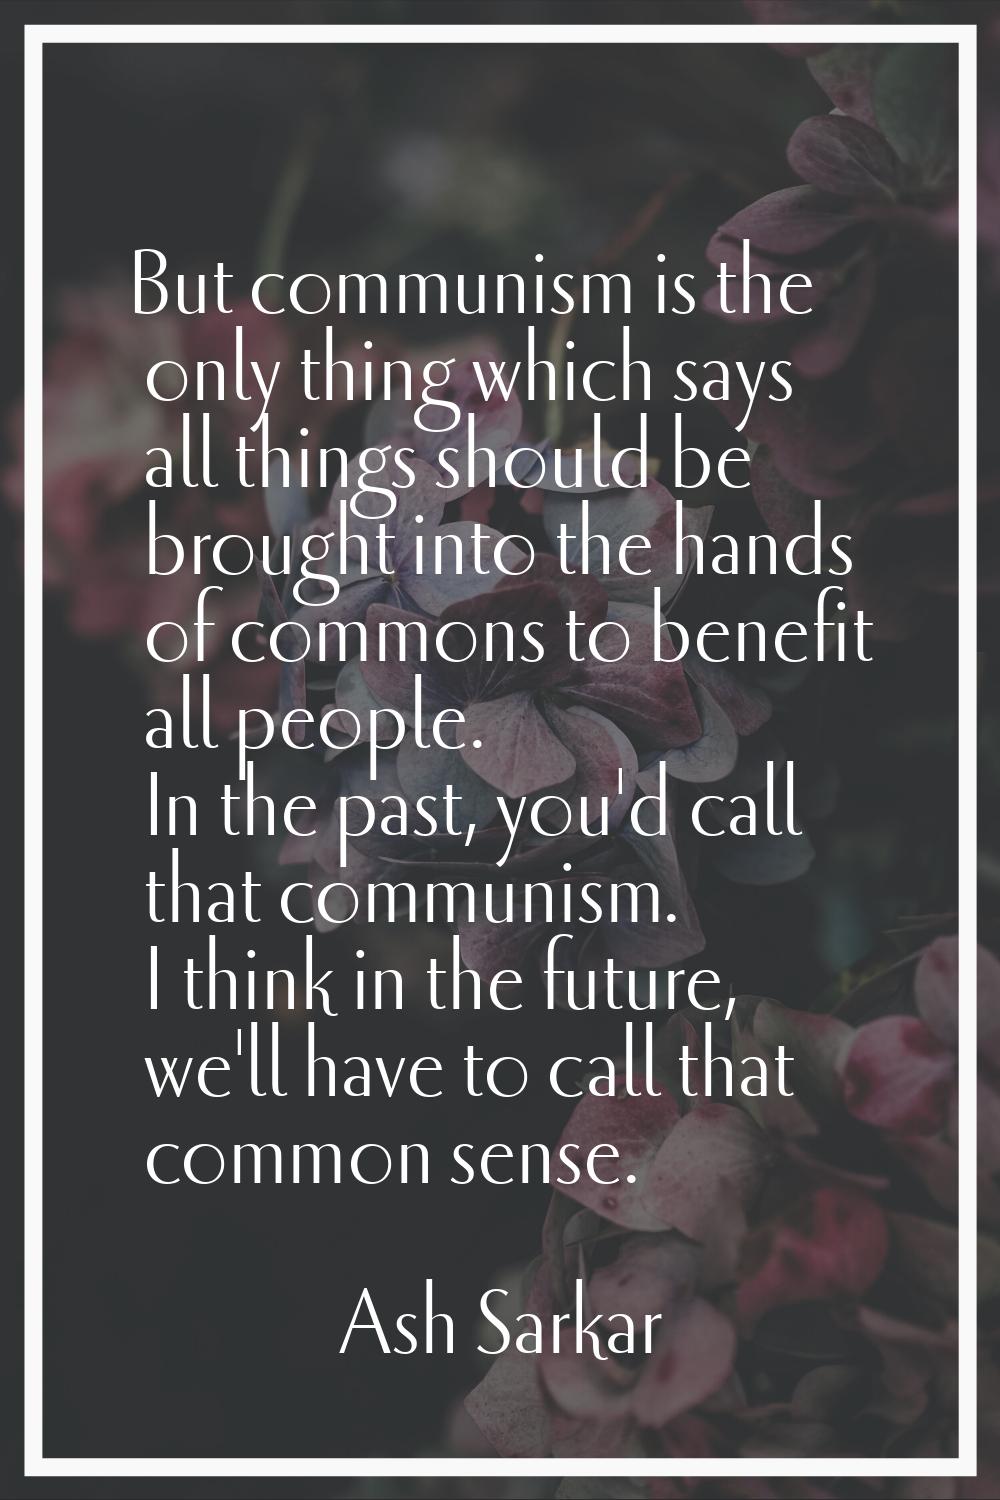 But communism is the only thing which says all things should be brought into the hands of commons t